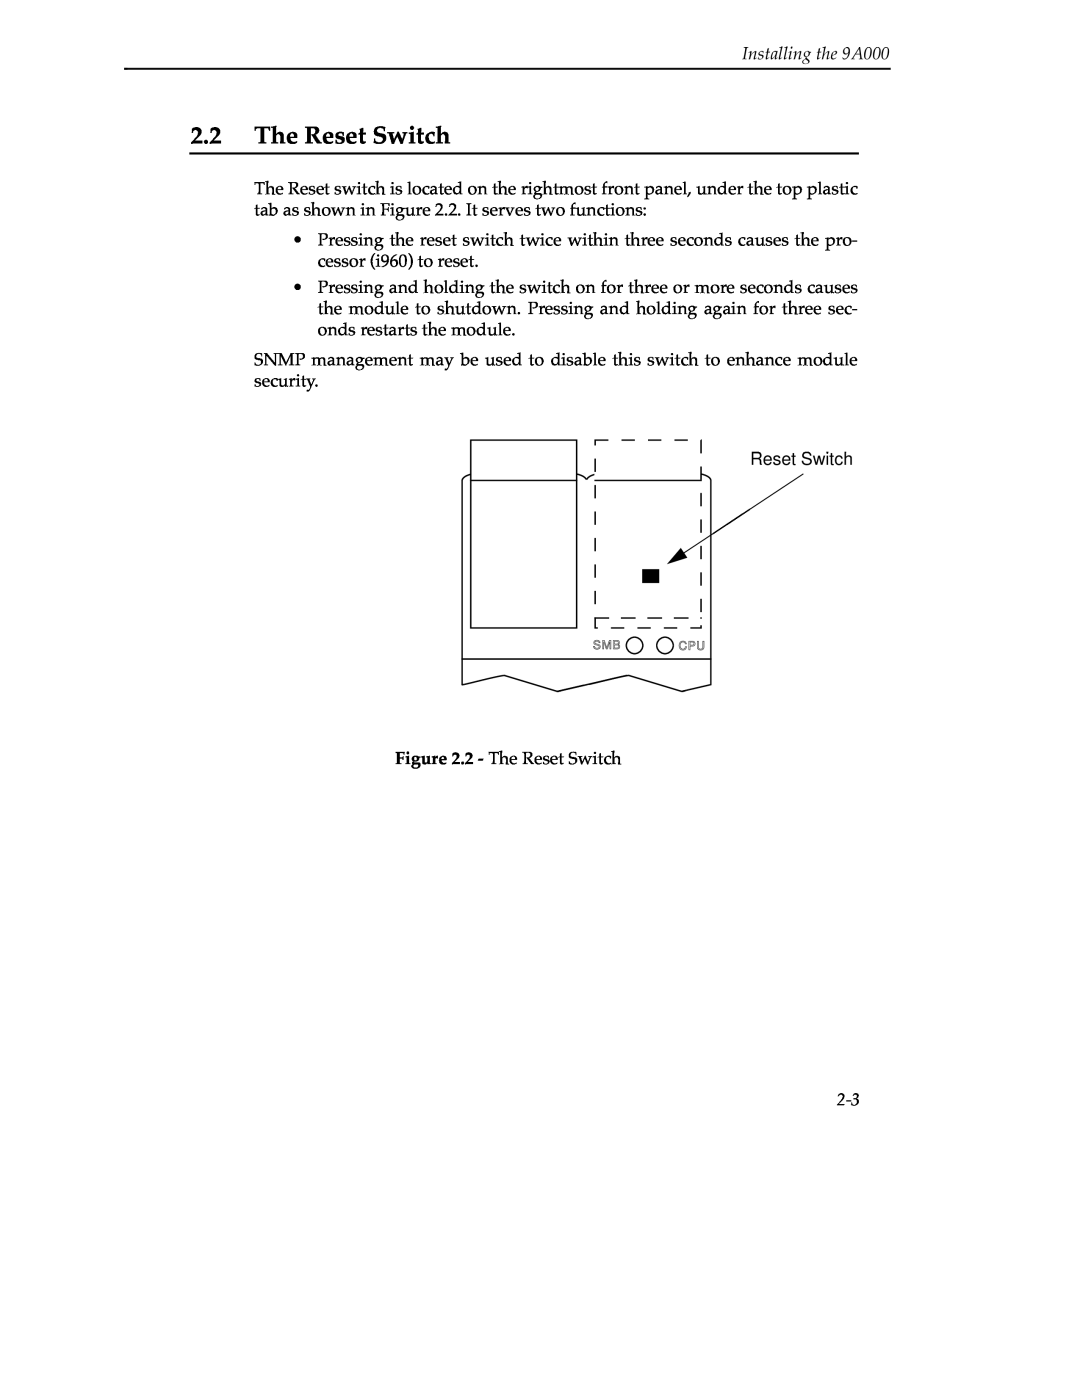 Cabletron Systems manual The Reset Switch, Installing the 9A000 